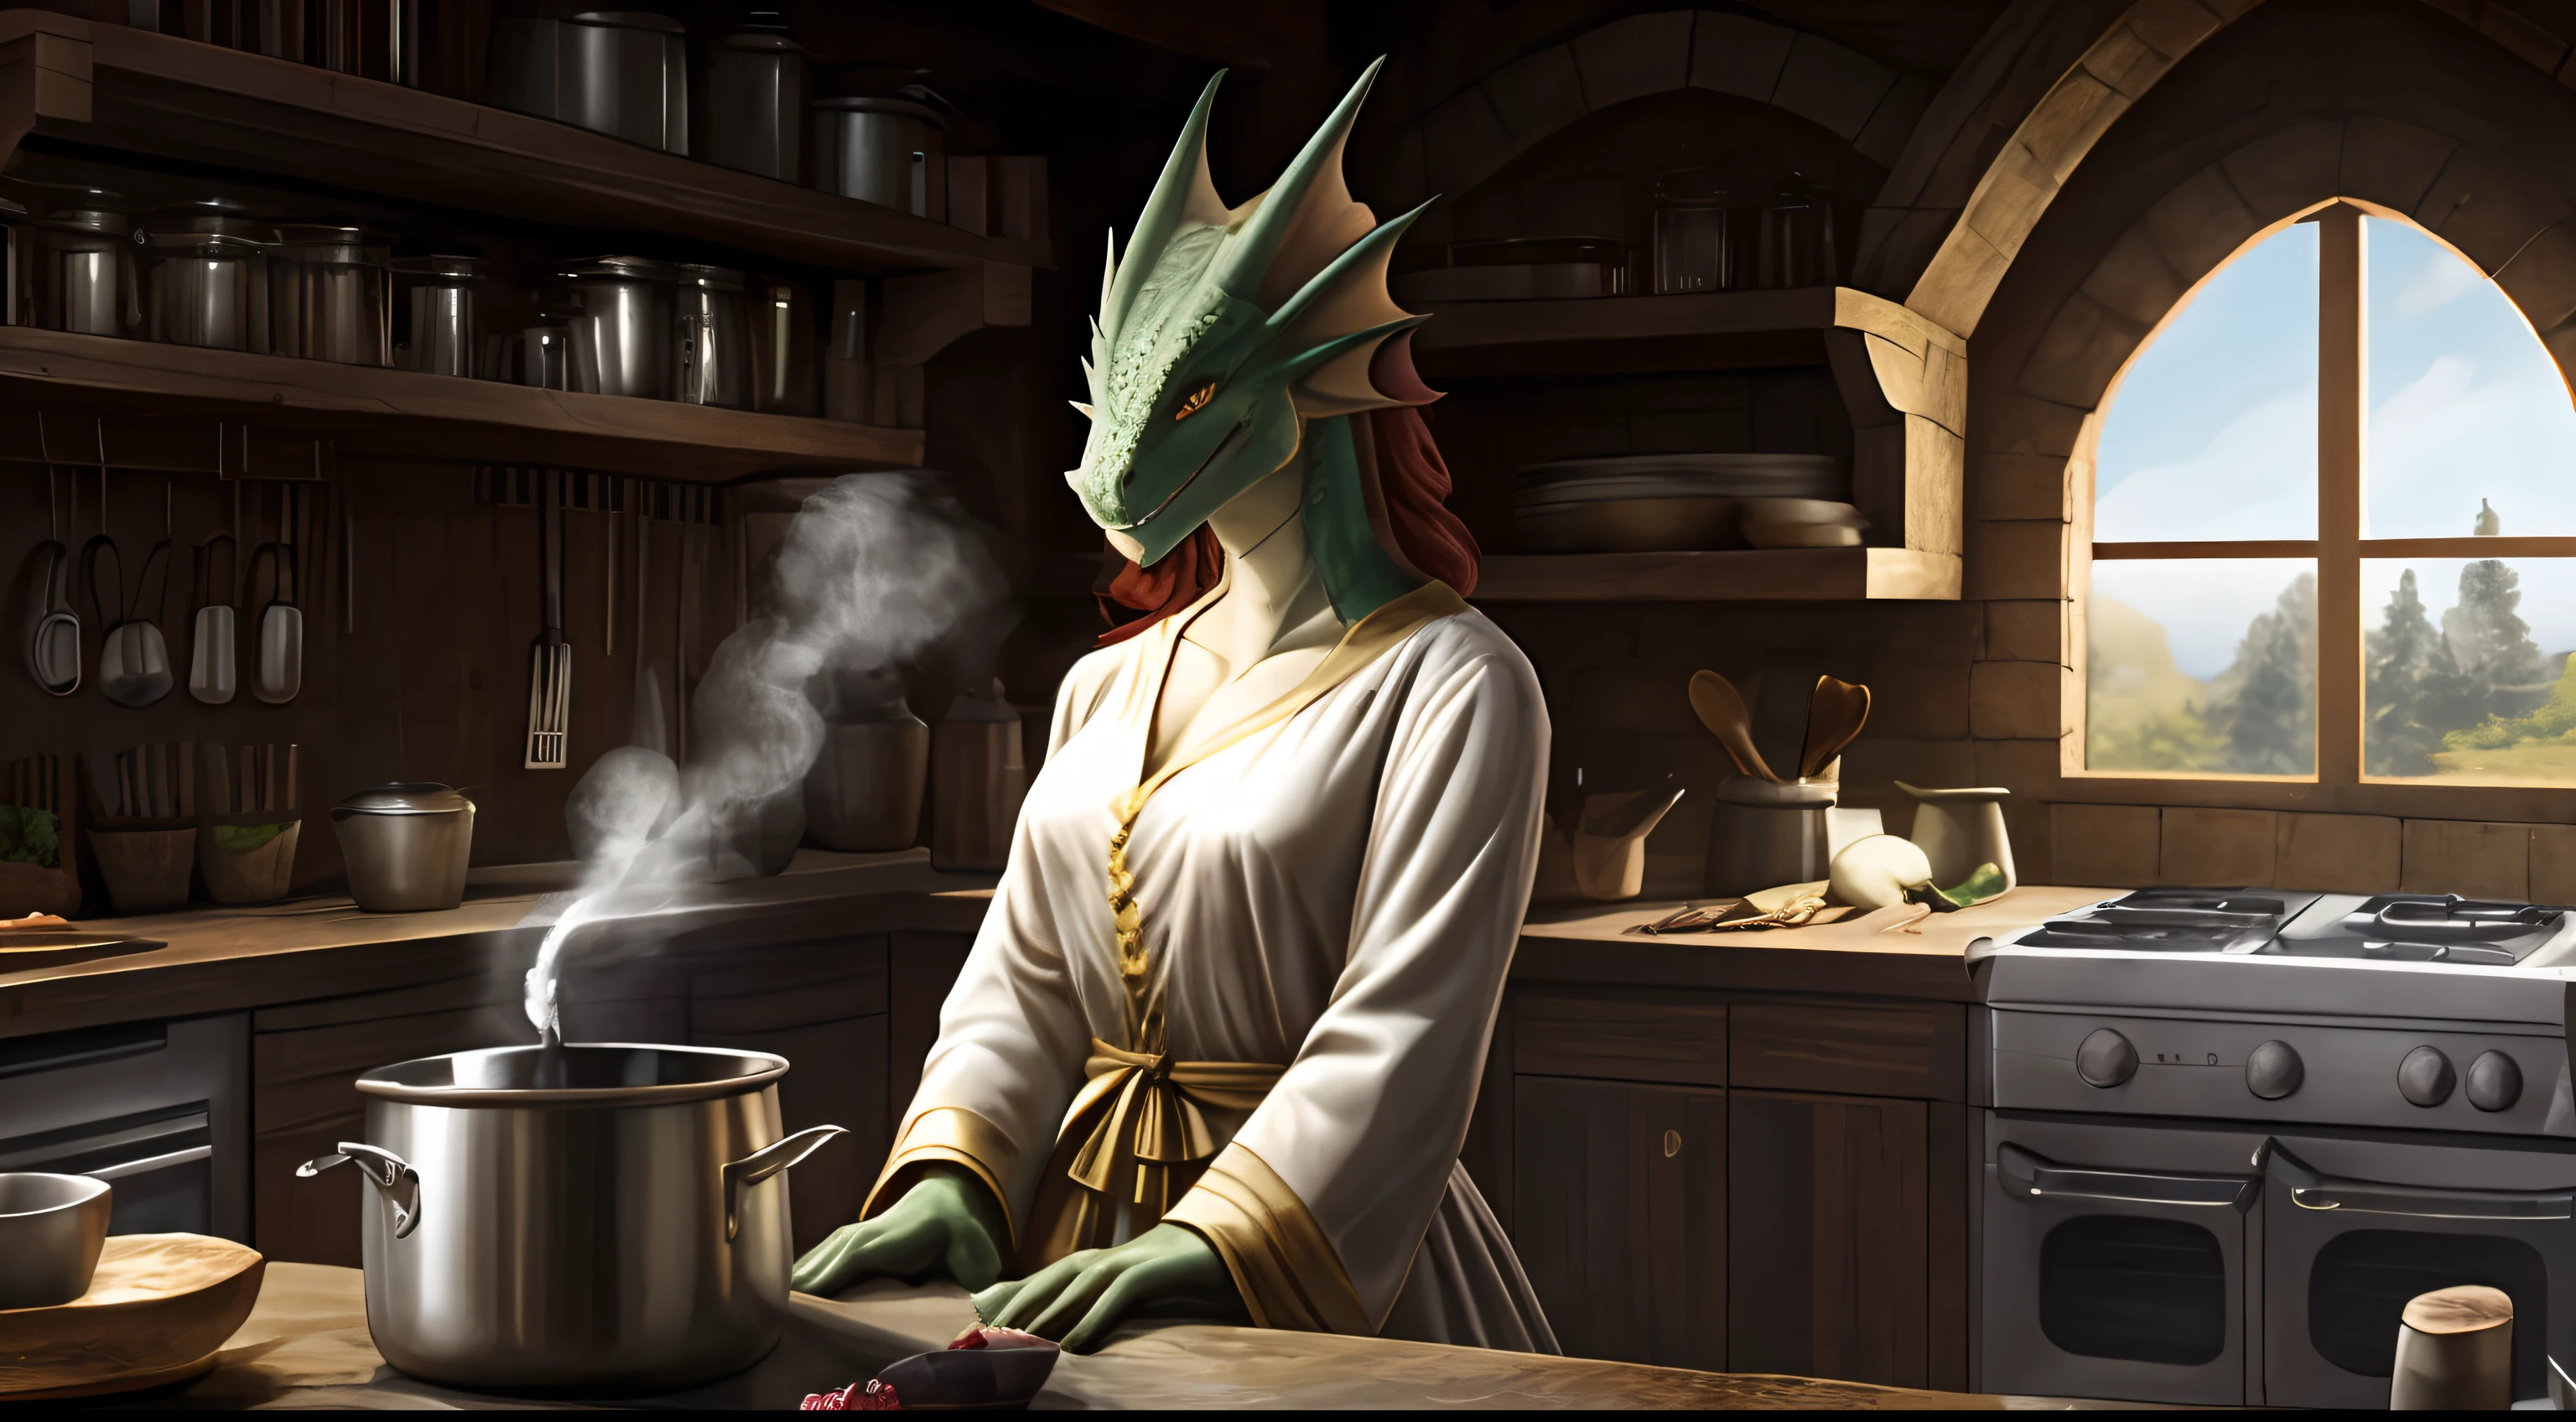 ((Seductive slender anthro dragoness in medieval robes)), Women's, anthro, dragon/Lizard's head, scaly body,, in full growth, Slender breasts, scaled skin, Long red hair, membranous ears, small head, long neck, long legs, tail, Shelves with product backgrounds, The character prepares food in the kitchen, pans and pots, Steam and fire